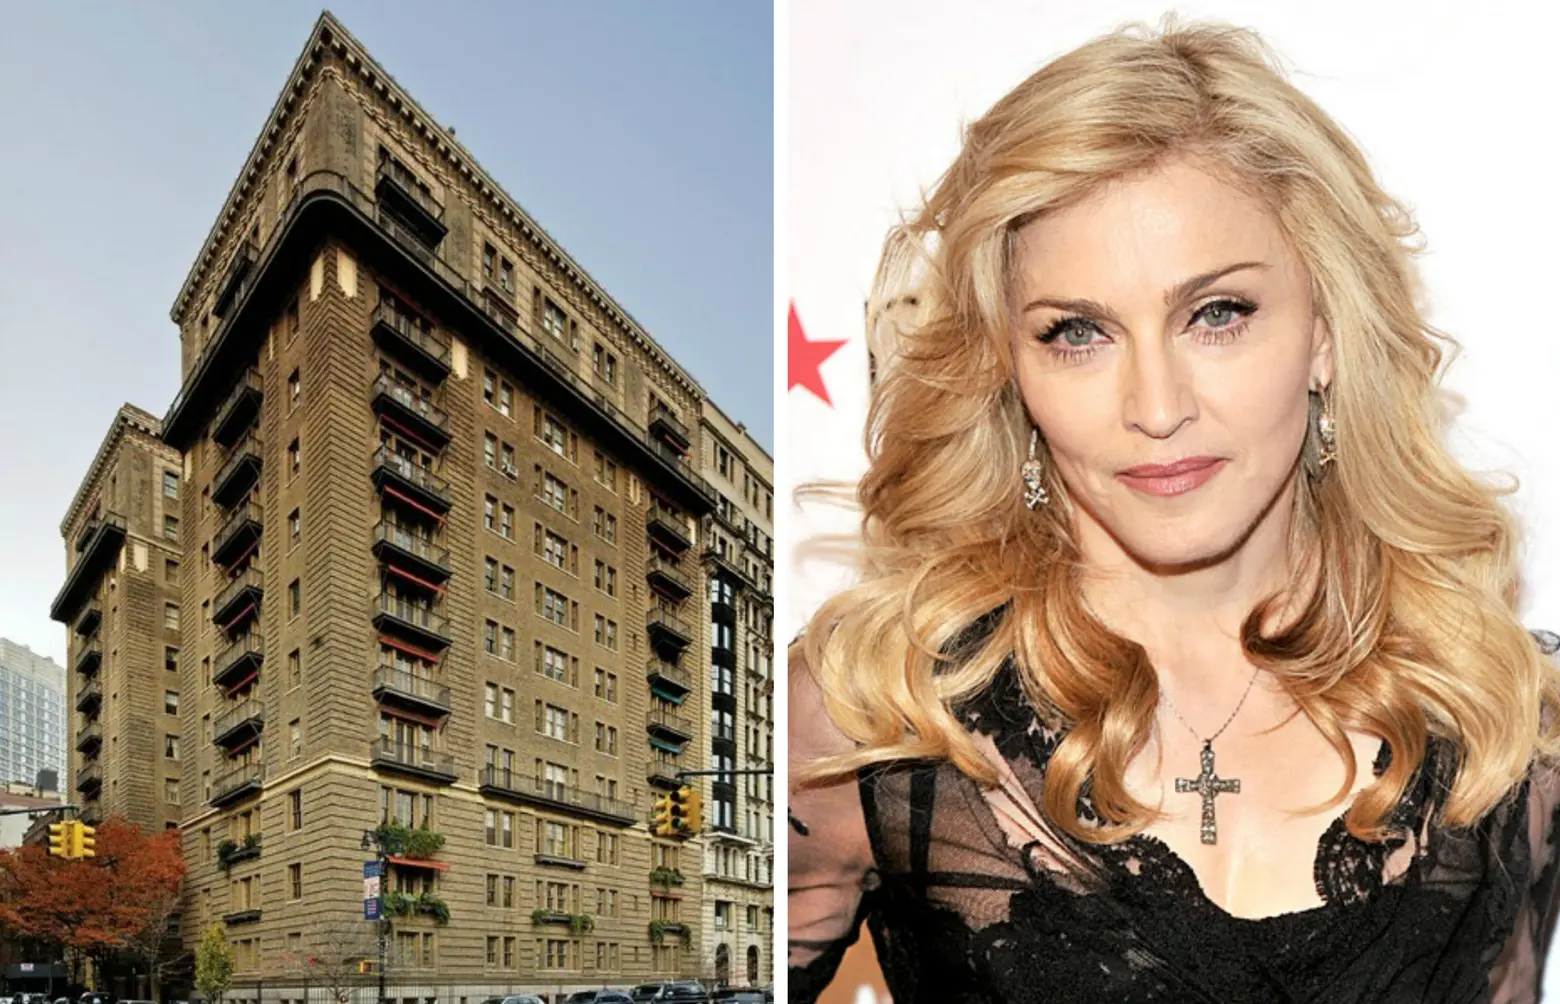 Lawsuit: Co-op board told Madonna she can’t have daughter Lourdes stay at her pad when she’s out